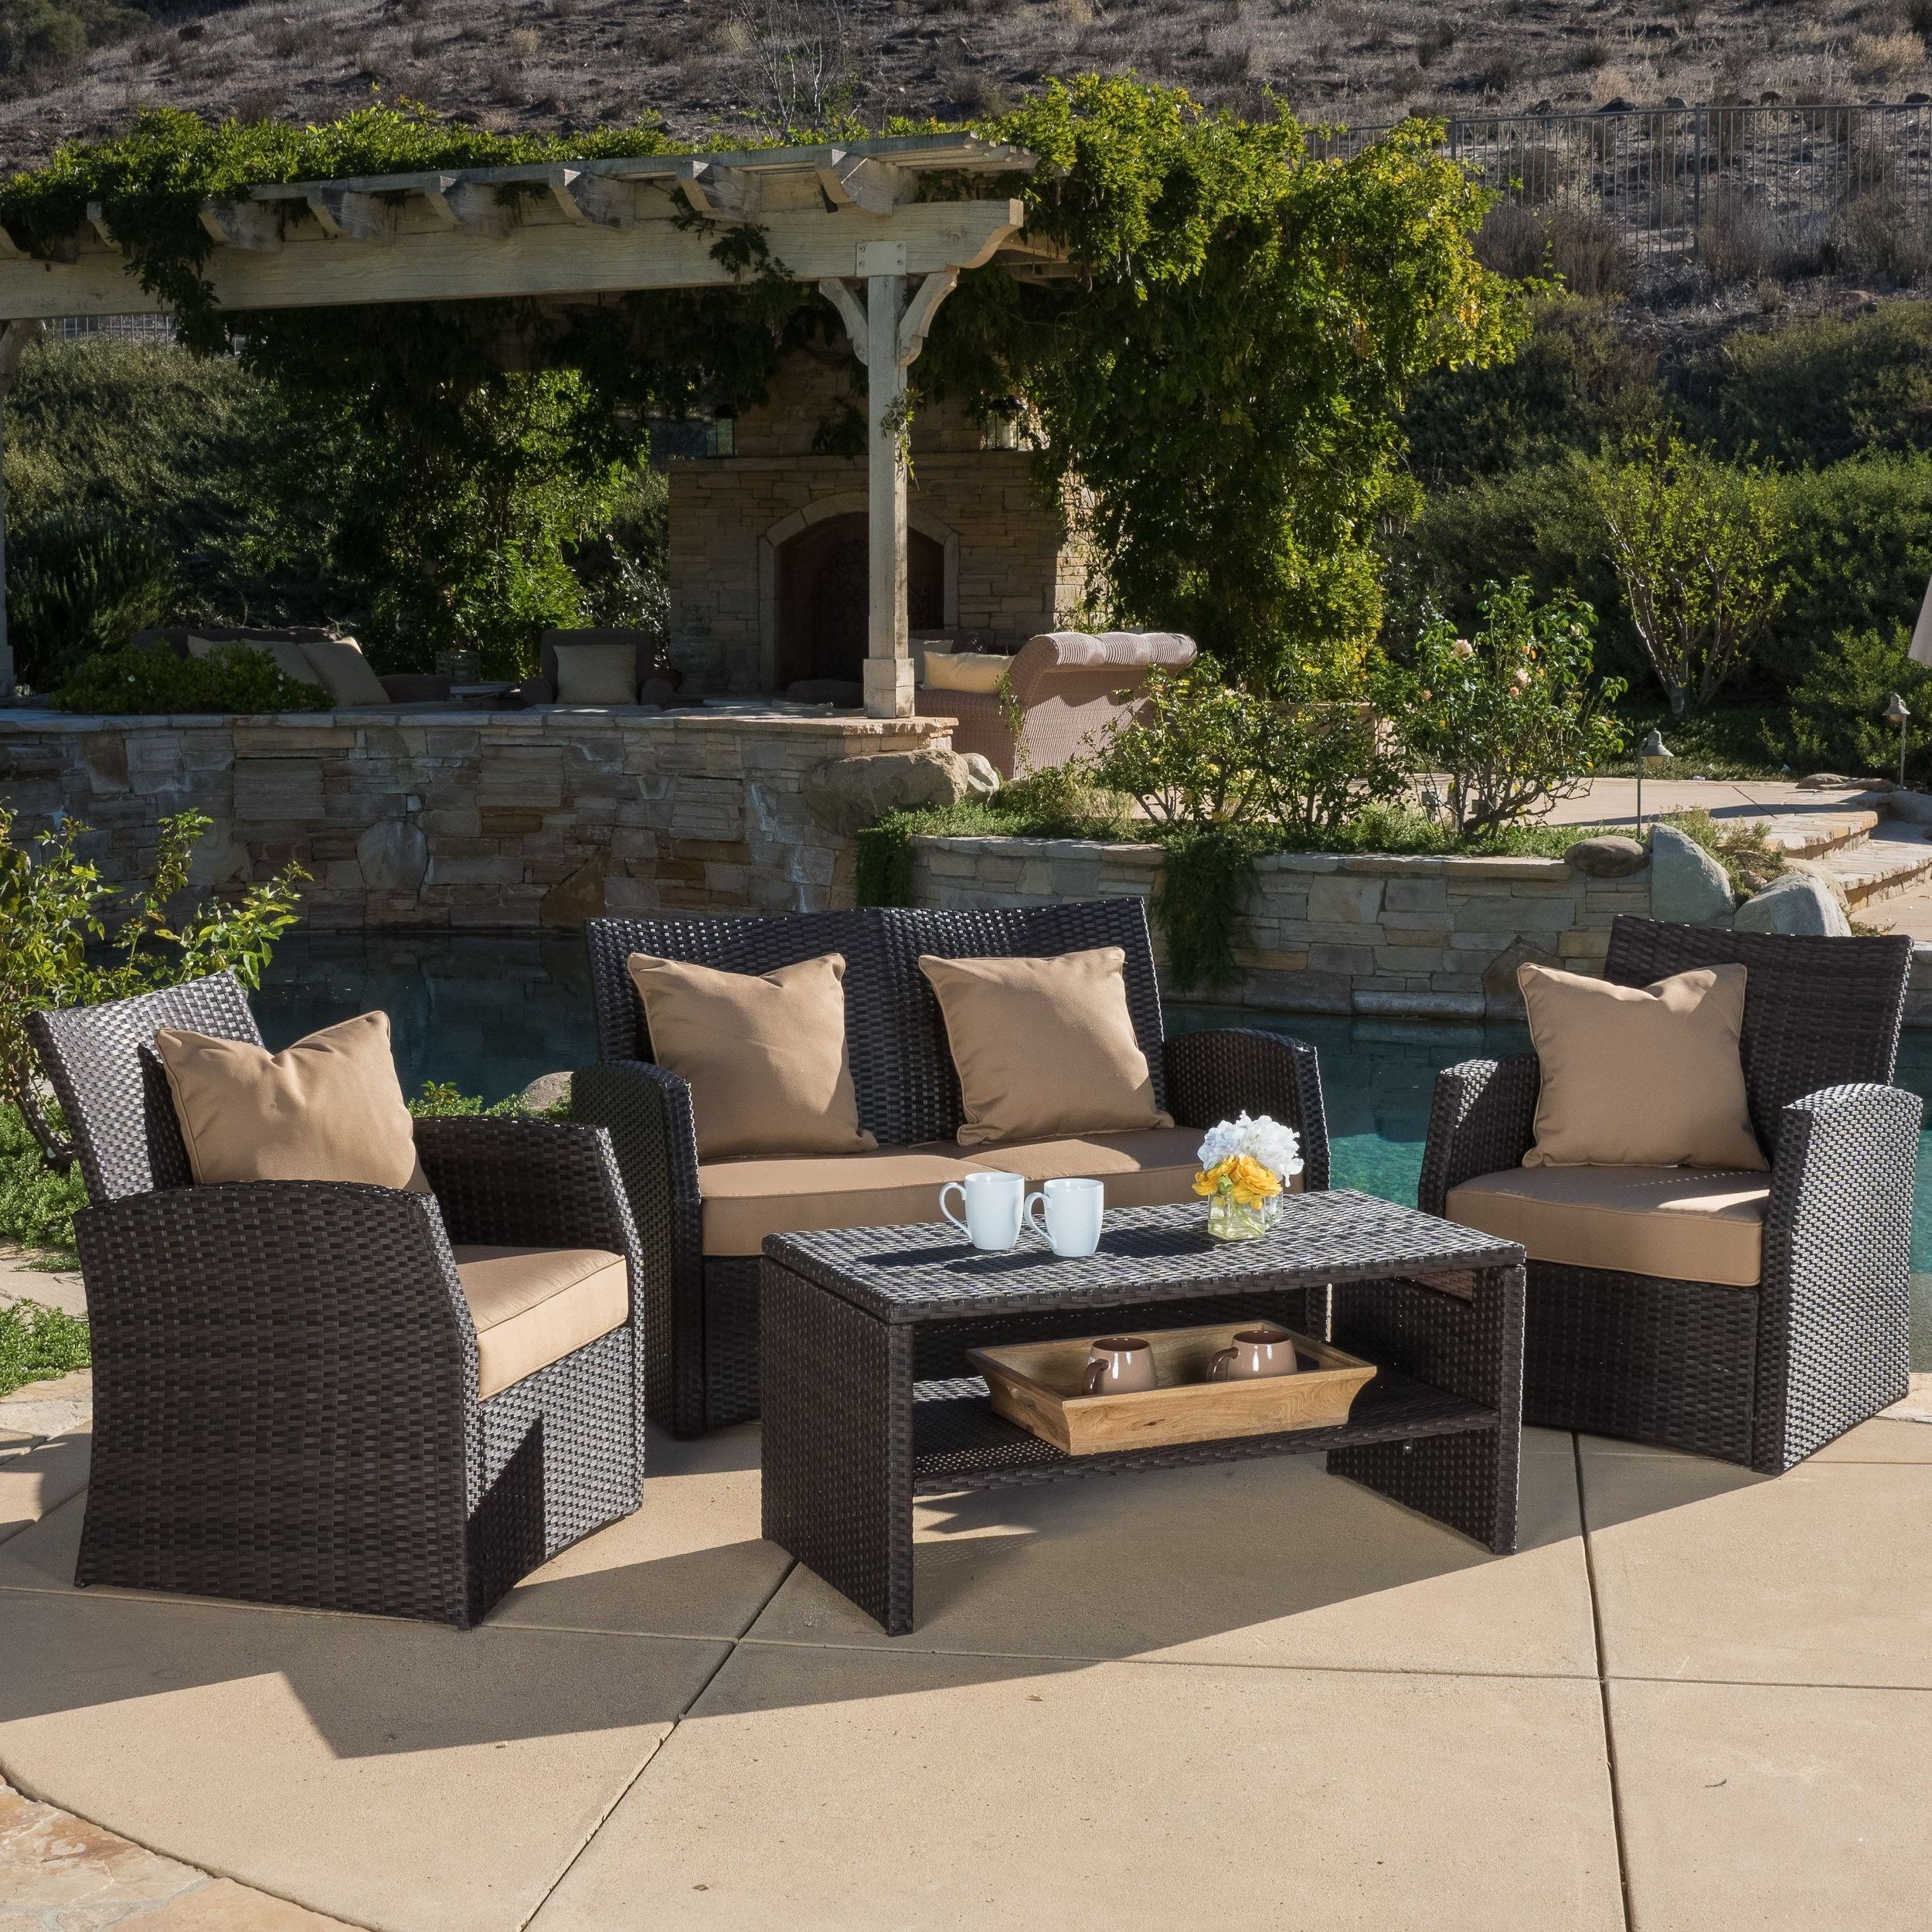 Sanger Outdoor 4 Piece Wicker Seating Setchristopher Knight Home Throughout Newest 4 Piece Wicker Outdoor Seating Sets (View 13 of 15)